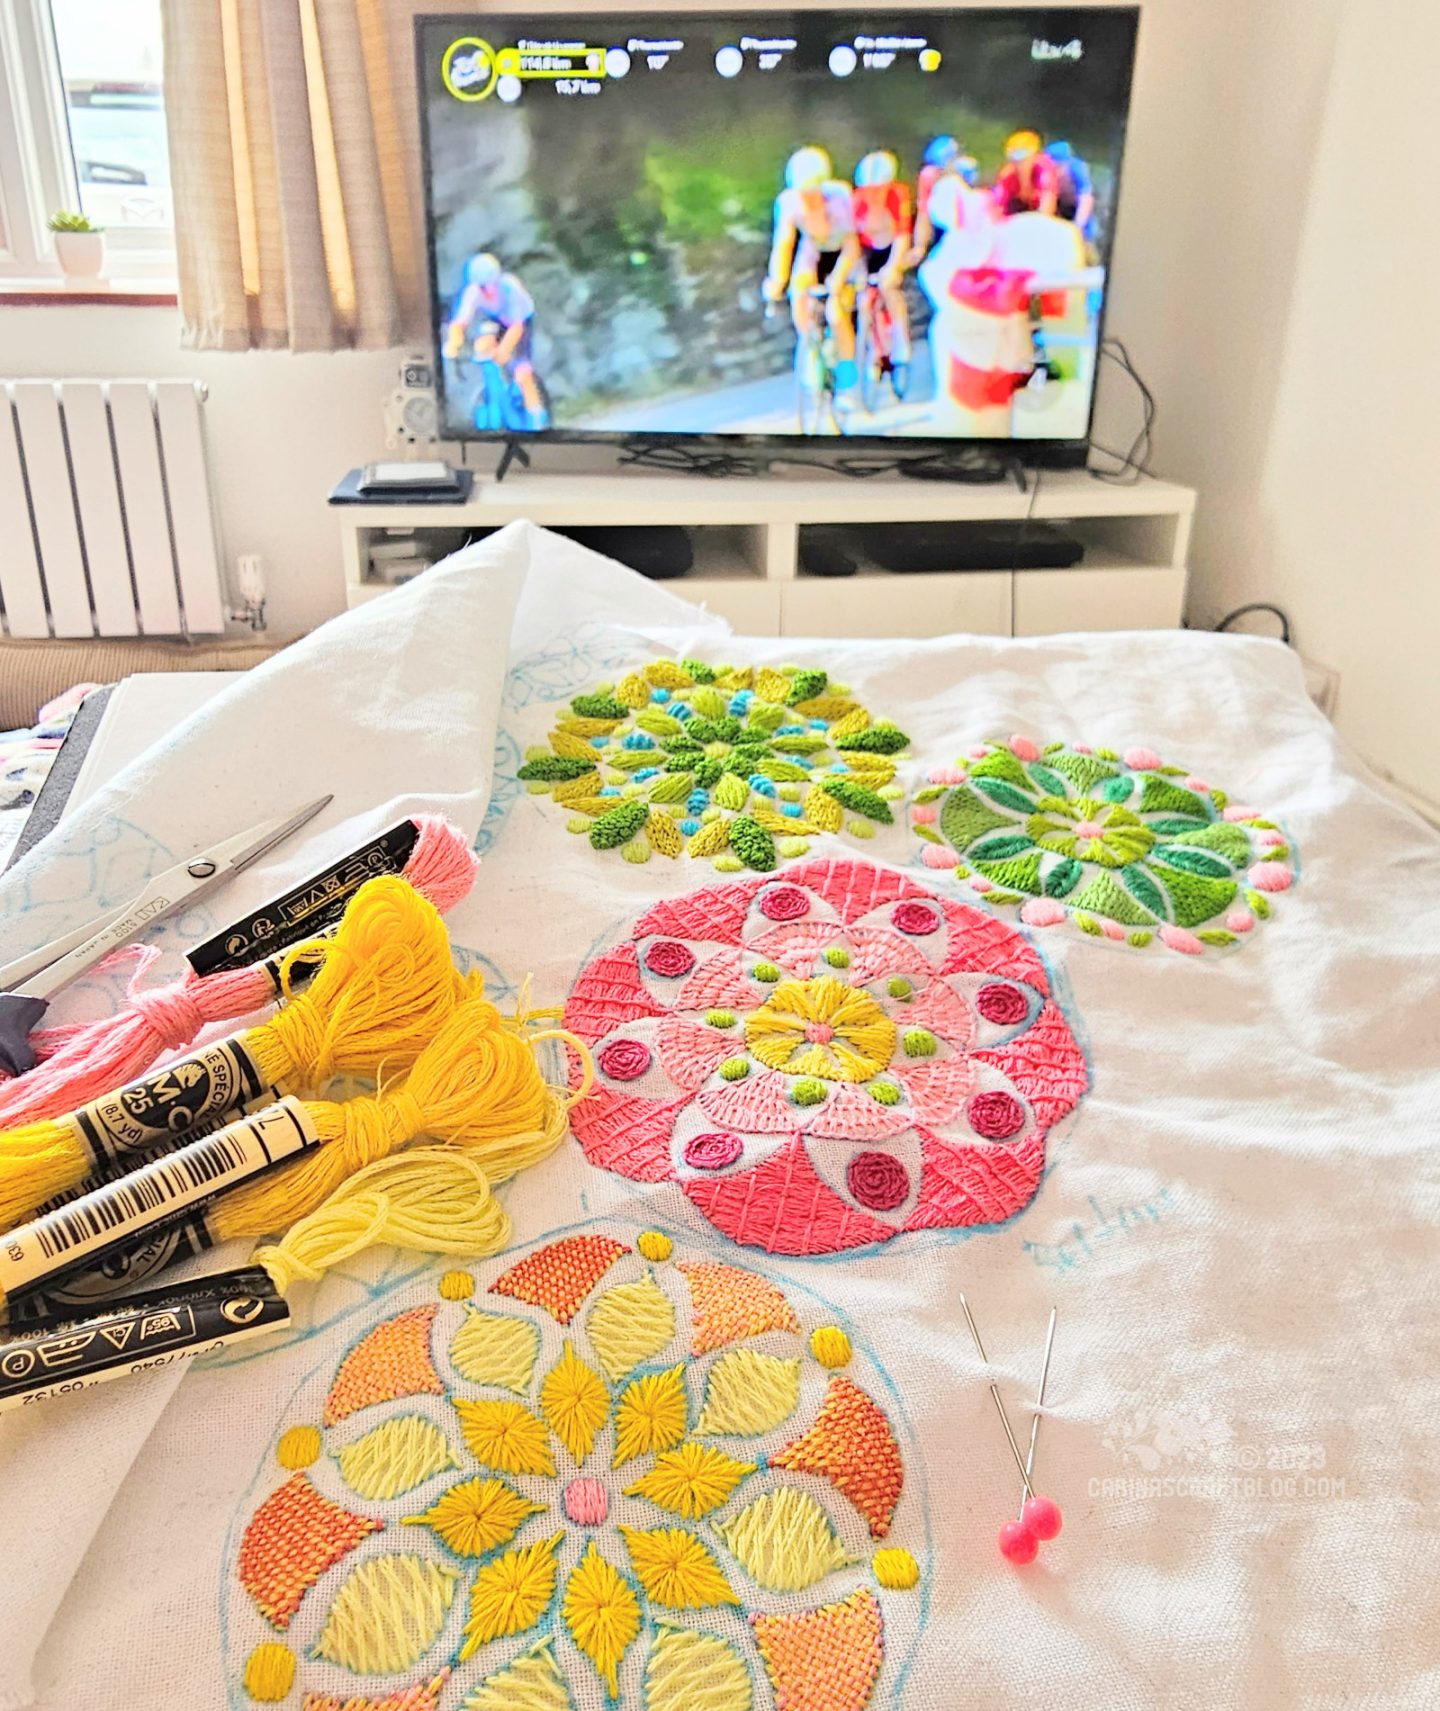 Close view of an embroidery on white fabric with mandala inspired motifs in yellow, pink and green colours. In the background is a tv showing the Tour de France bike race.